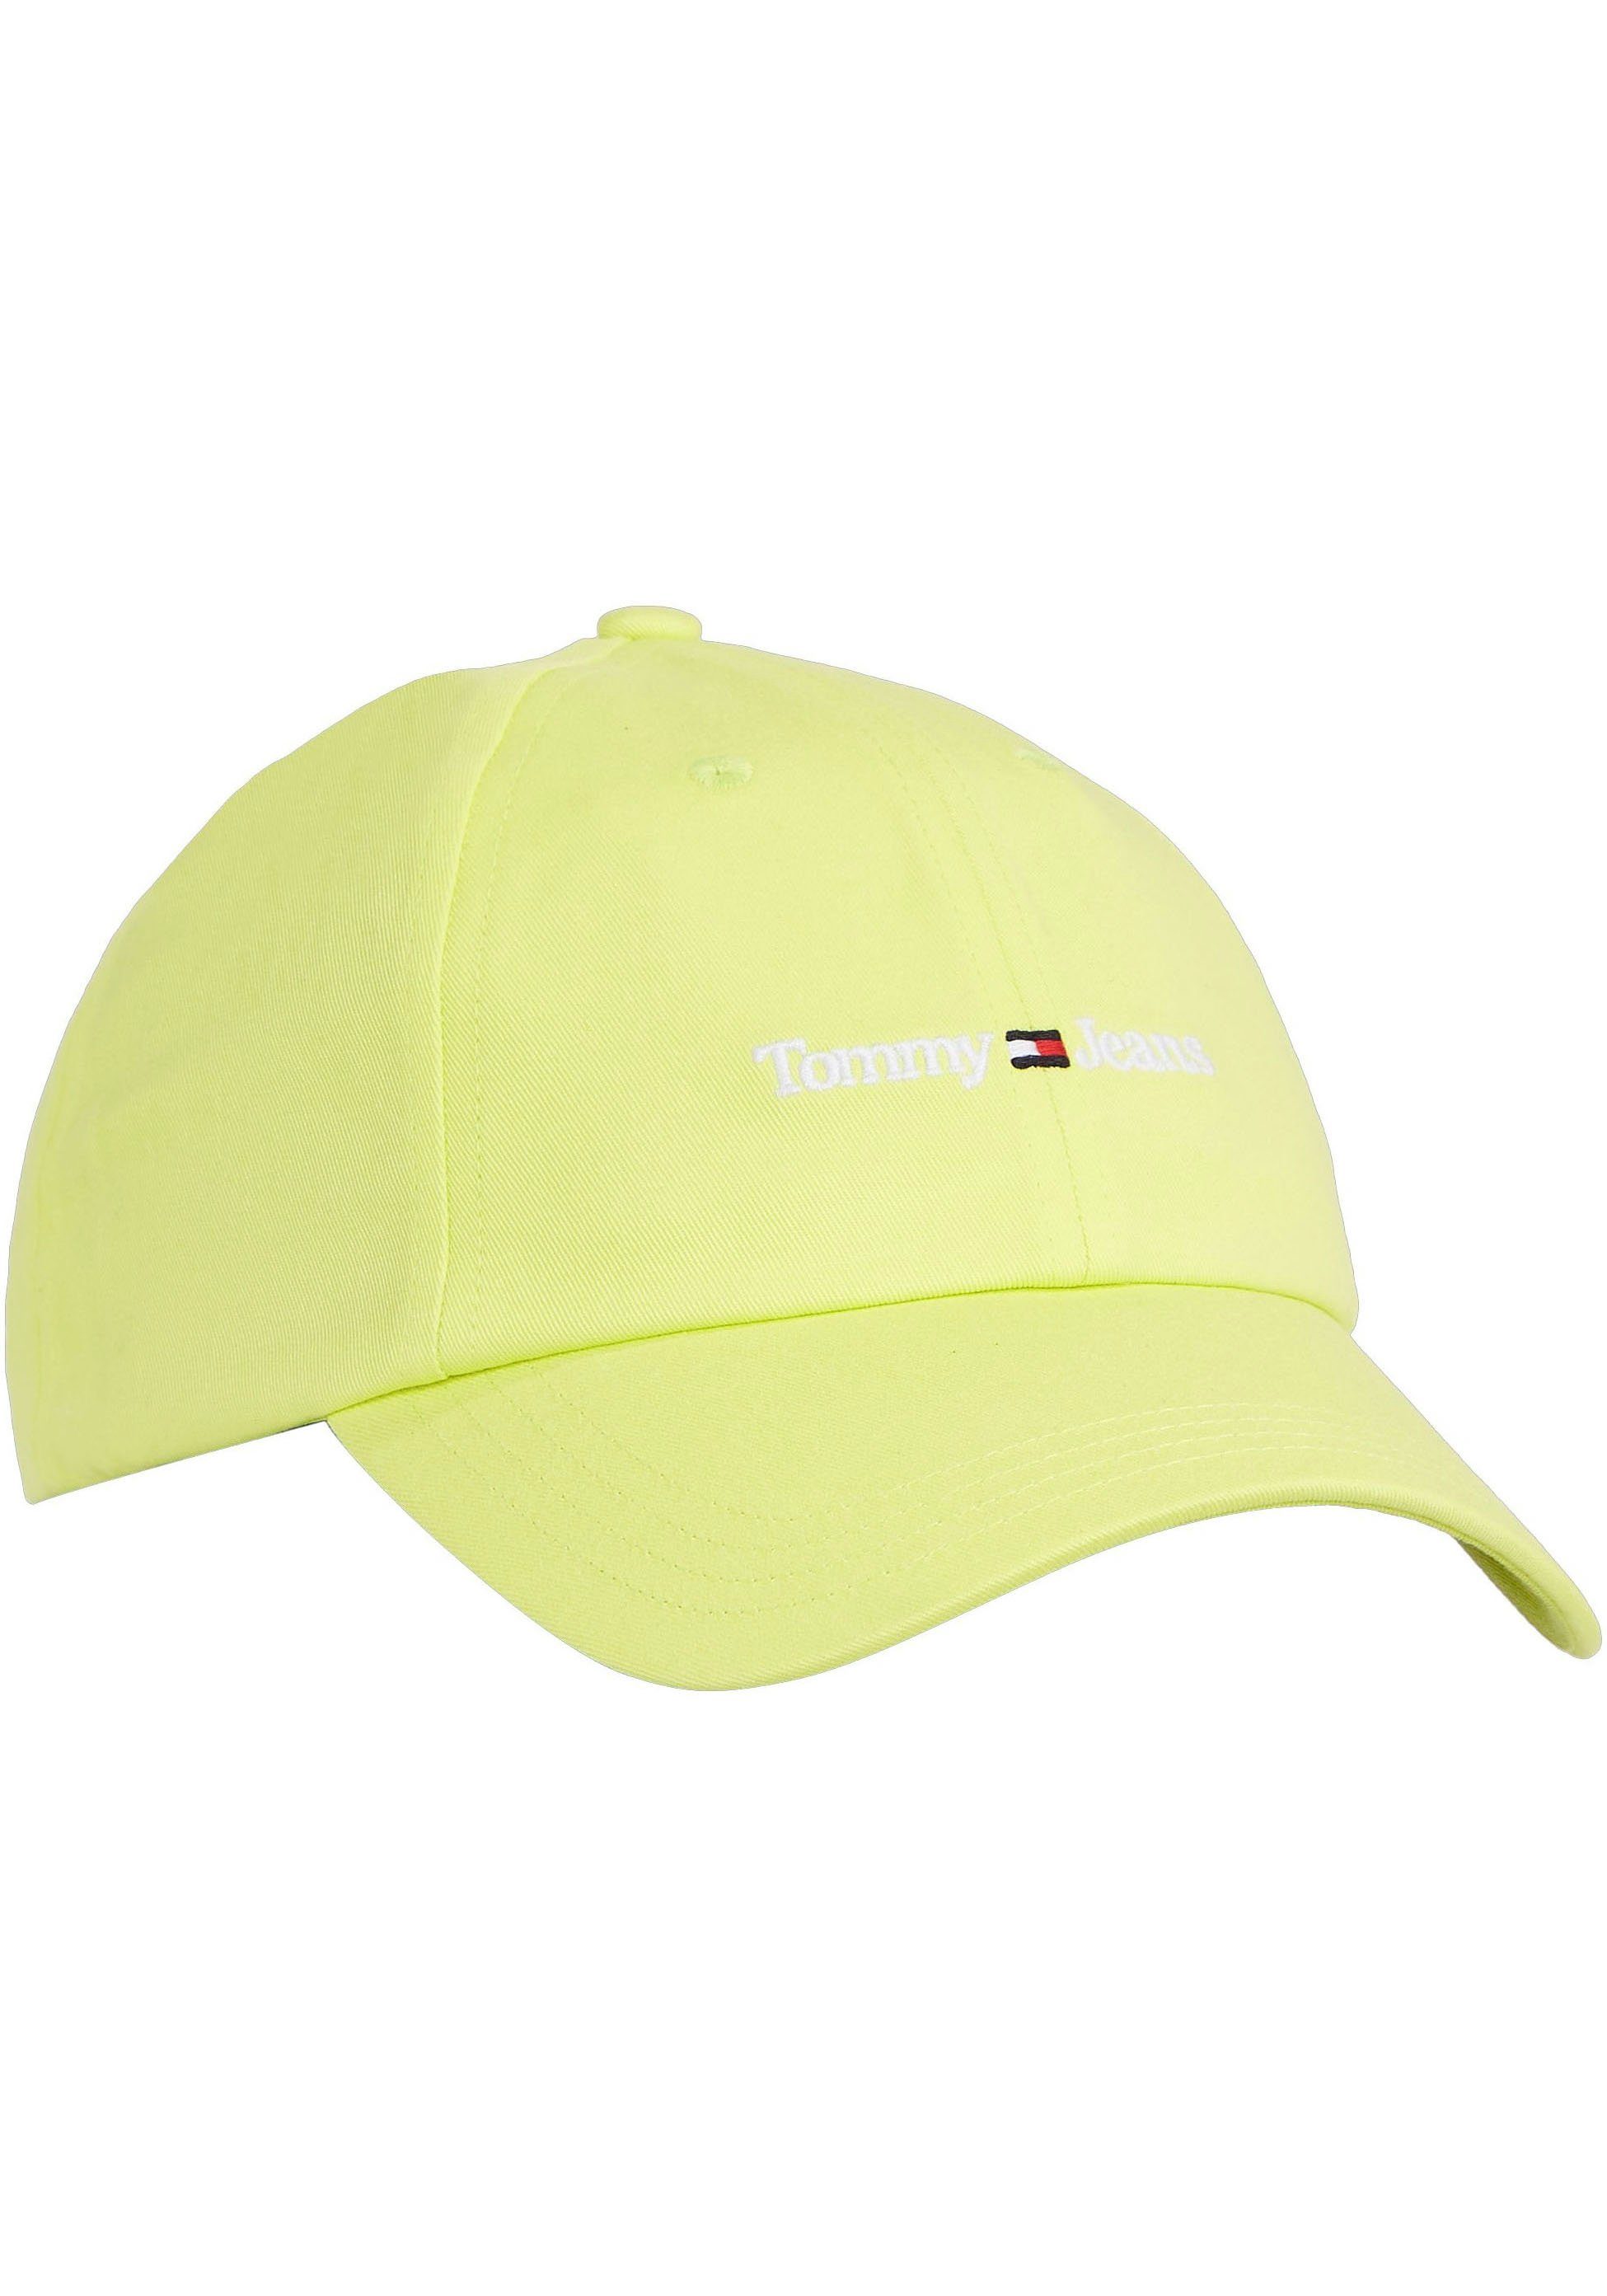 Tommy Jeans Baseball Cap mit Tommy Jeans Logostickerei limone | Baseball Caps